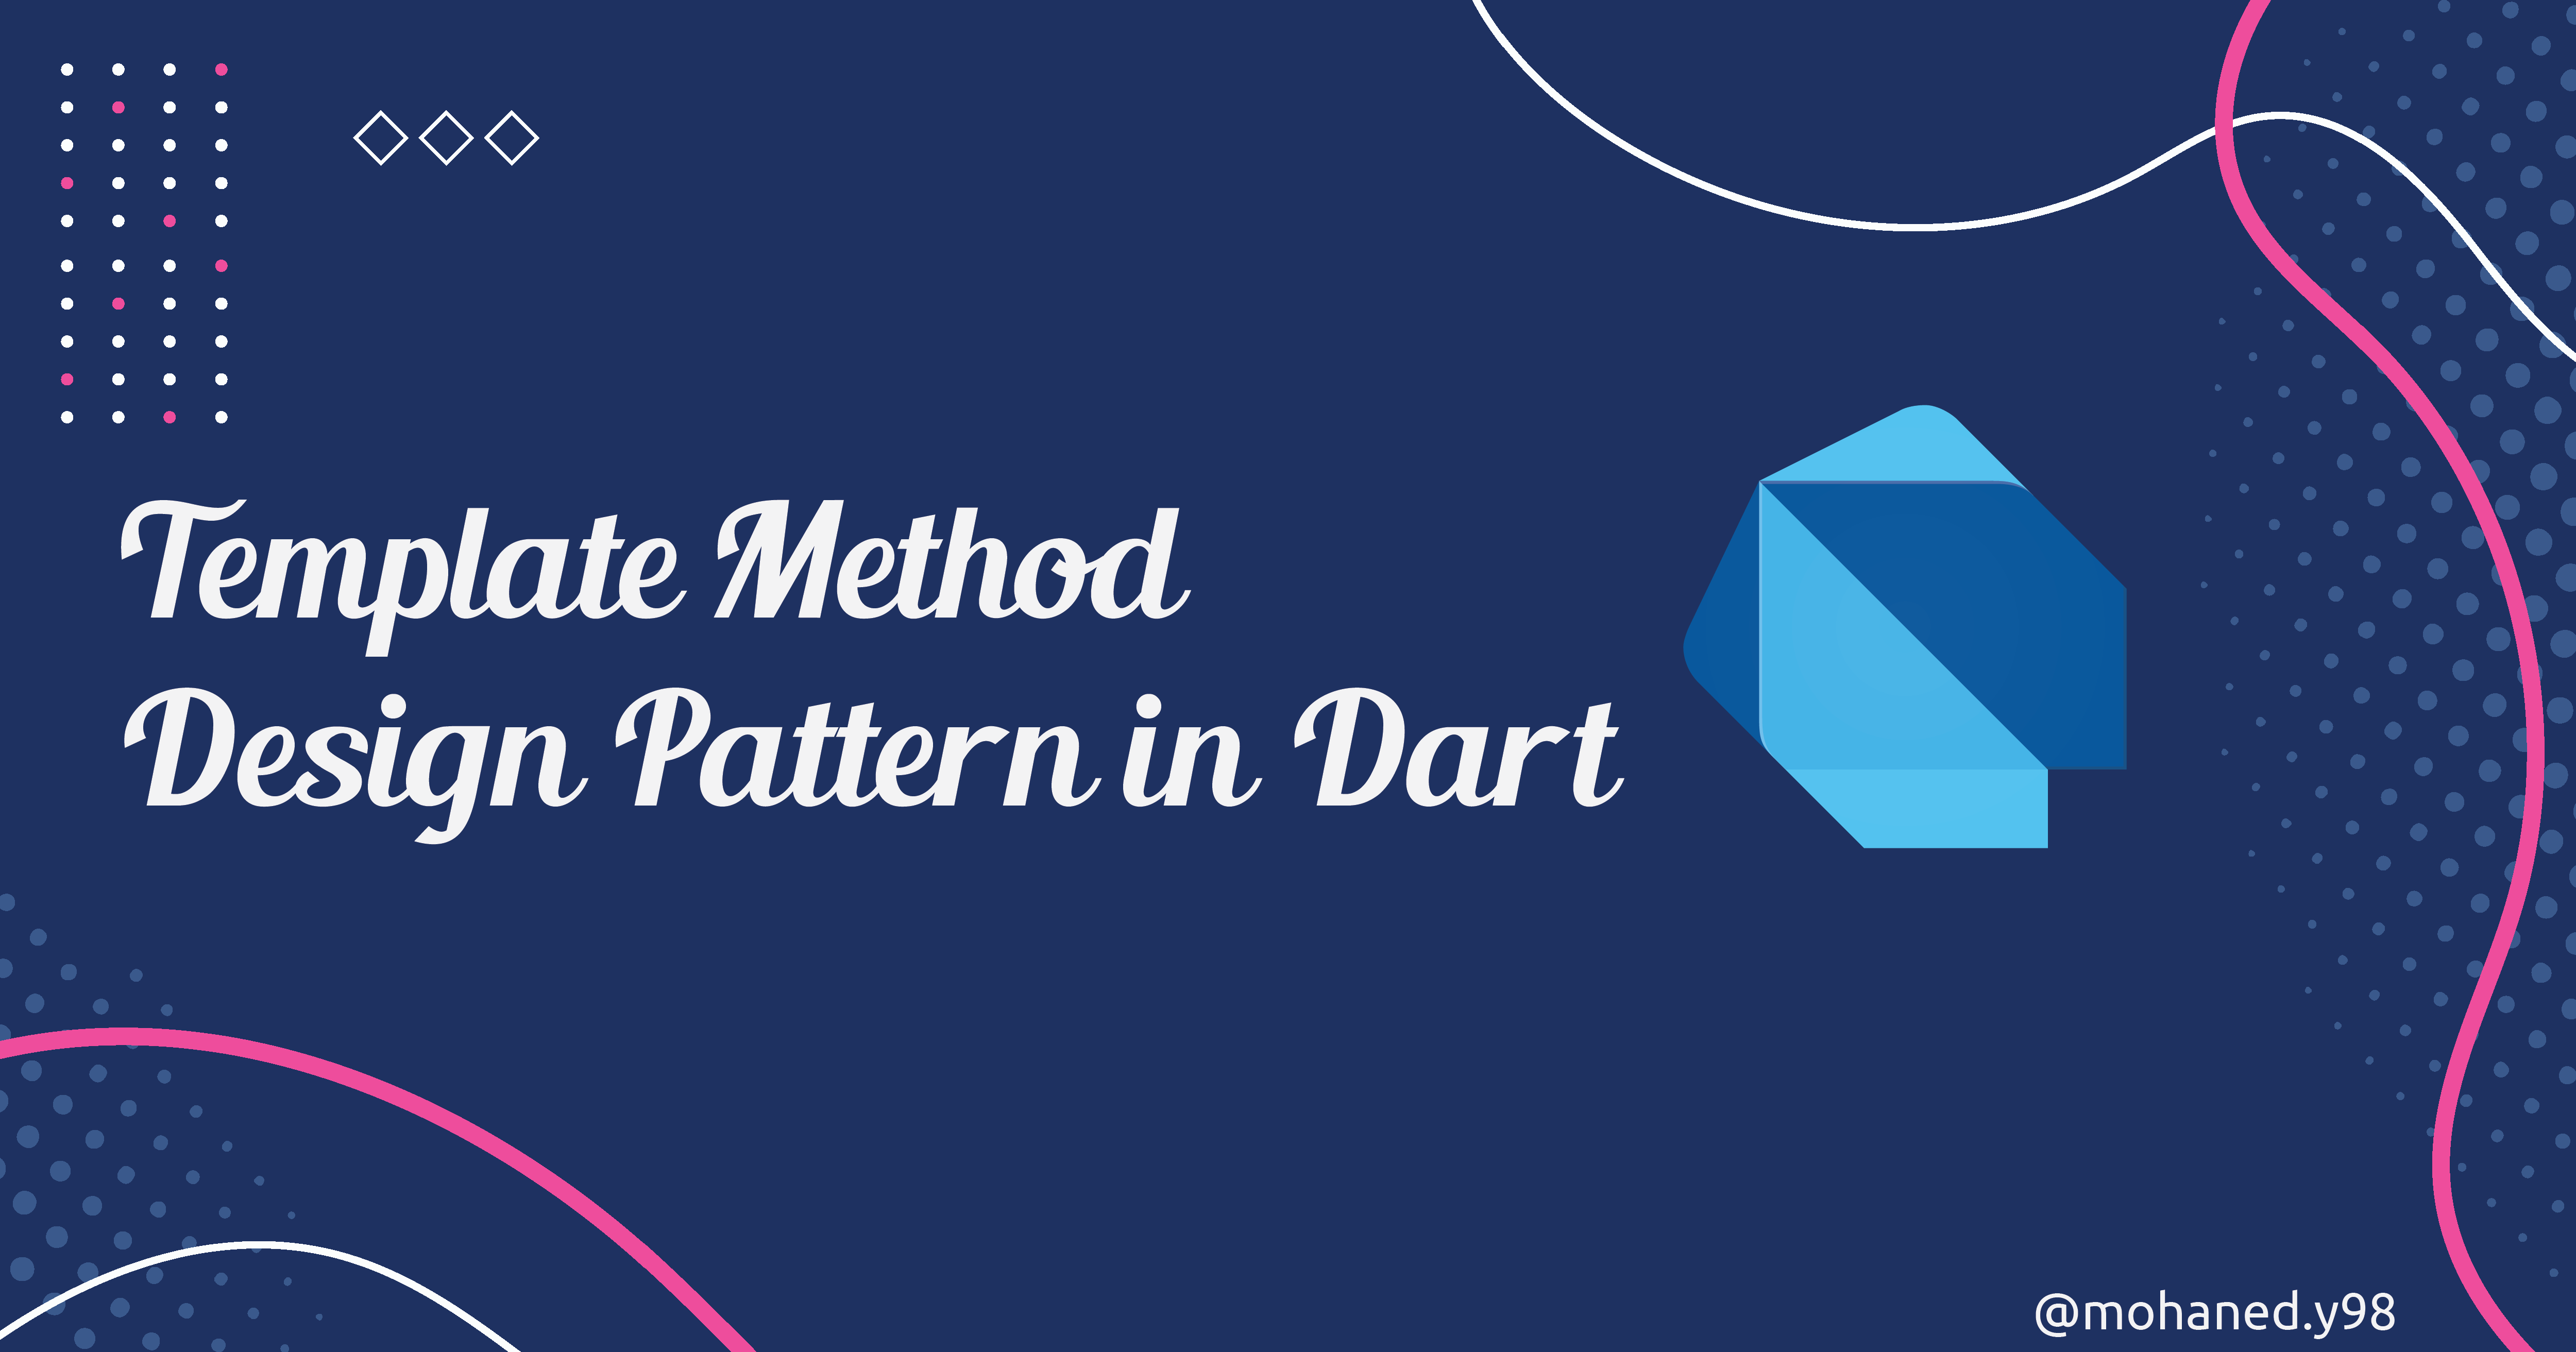 Template Method Design Pattern cover image